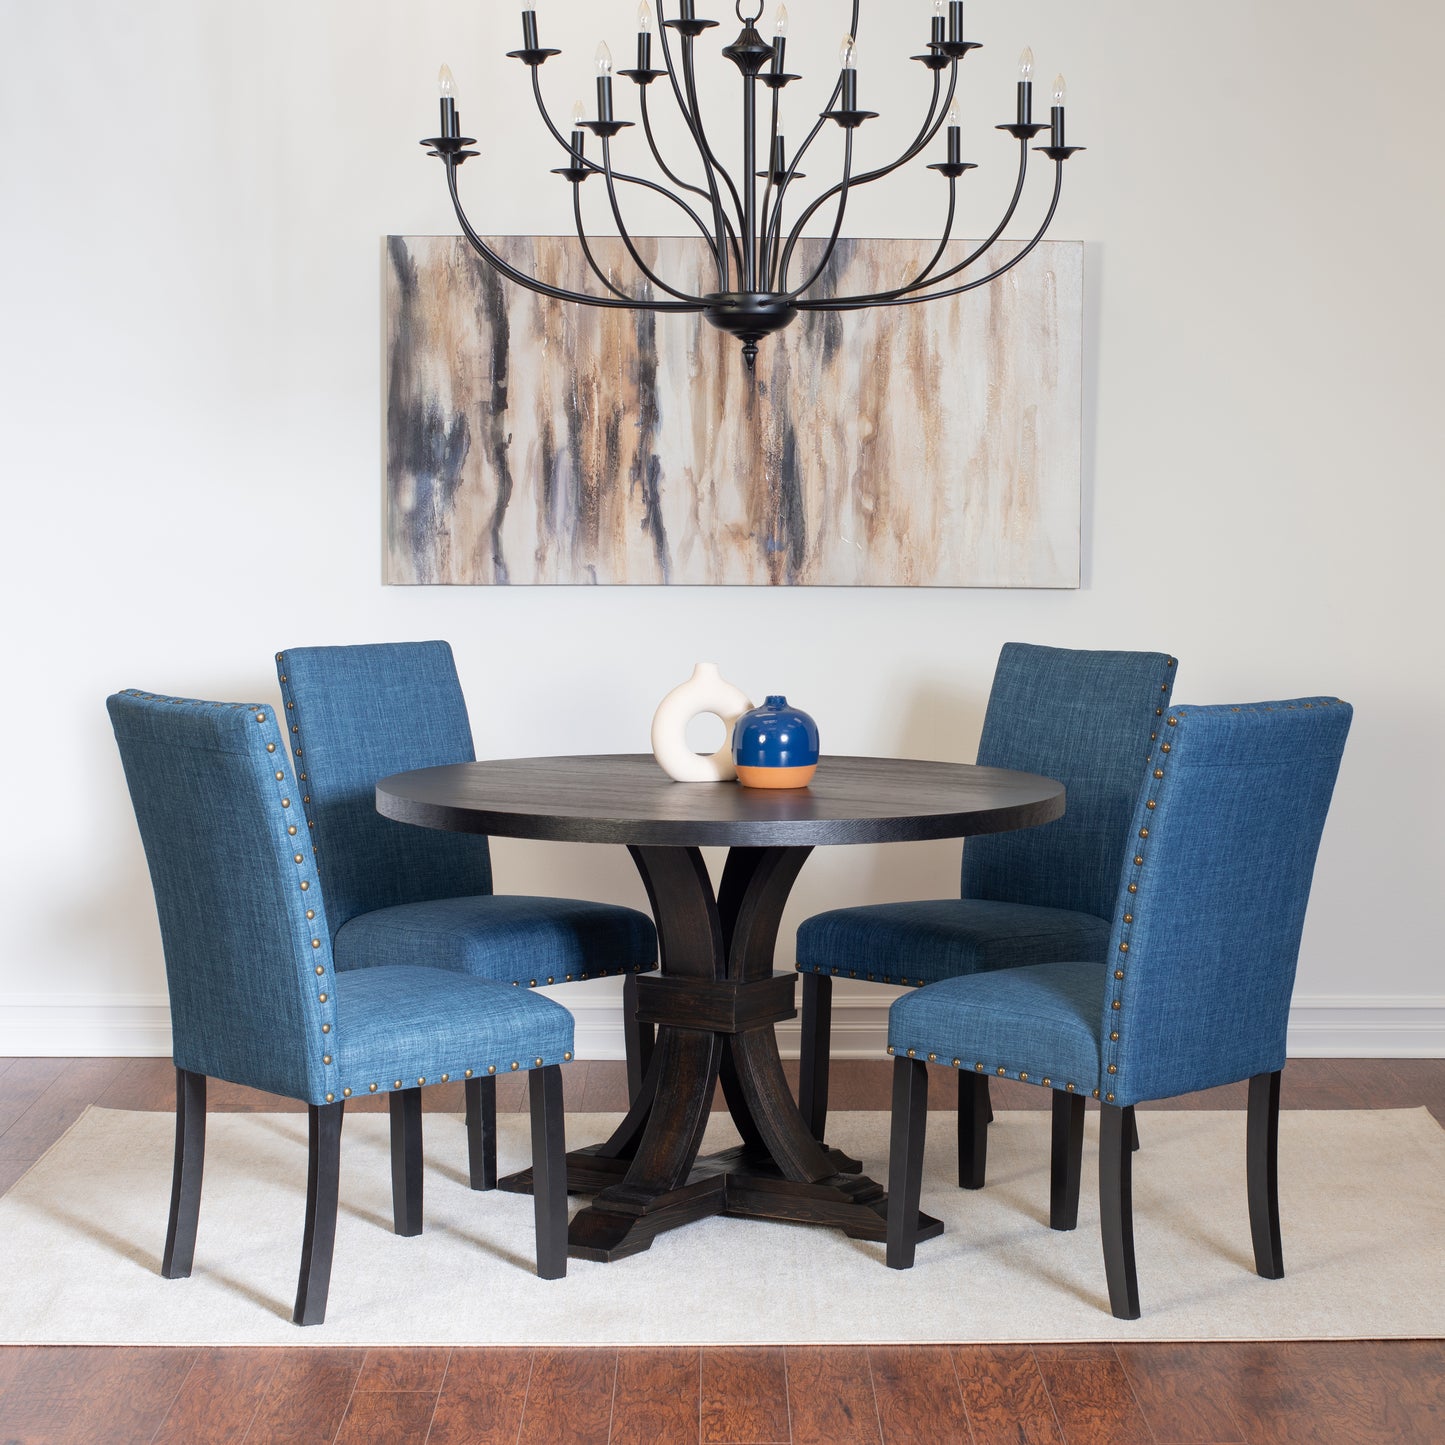 Eton 5-piece Dining Set, Distressed Pedestal Round Table with 4 Stylish Chairs